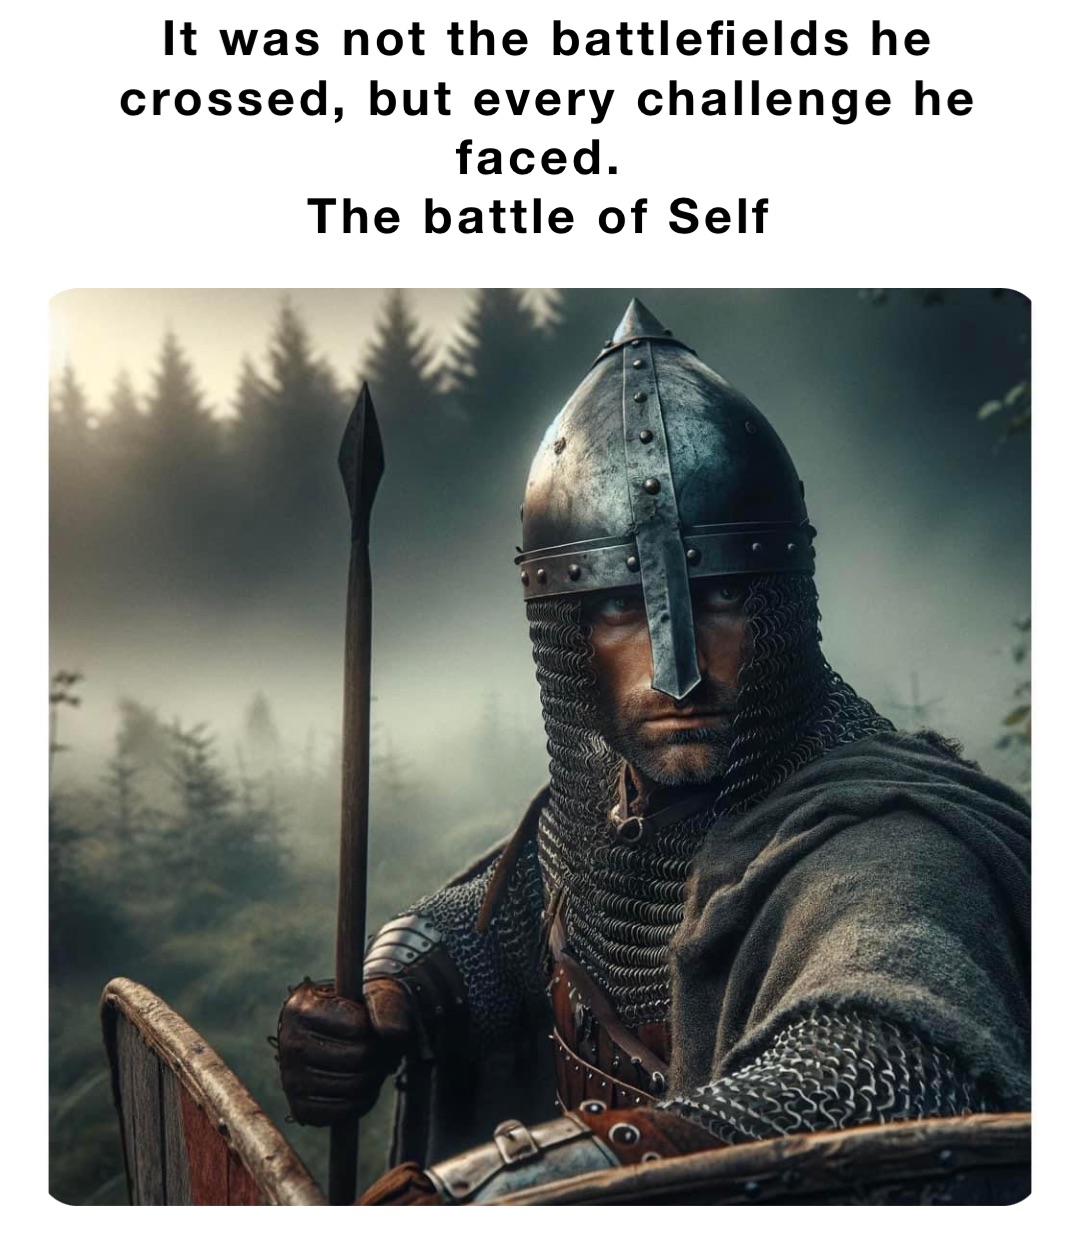 It was not the battlefields he crossed, but every challenge he faced.
The battle of Self